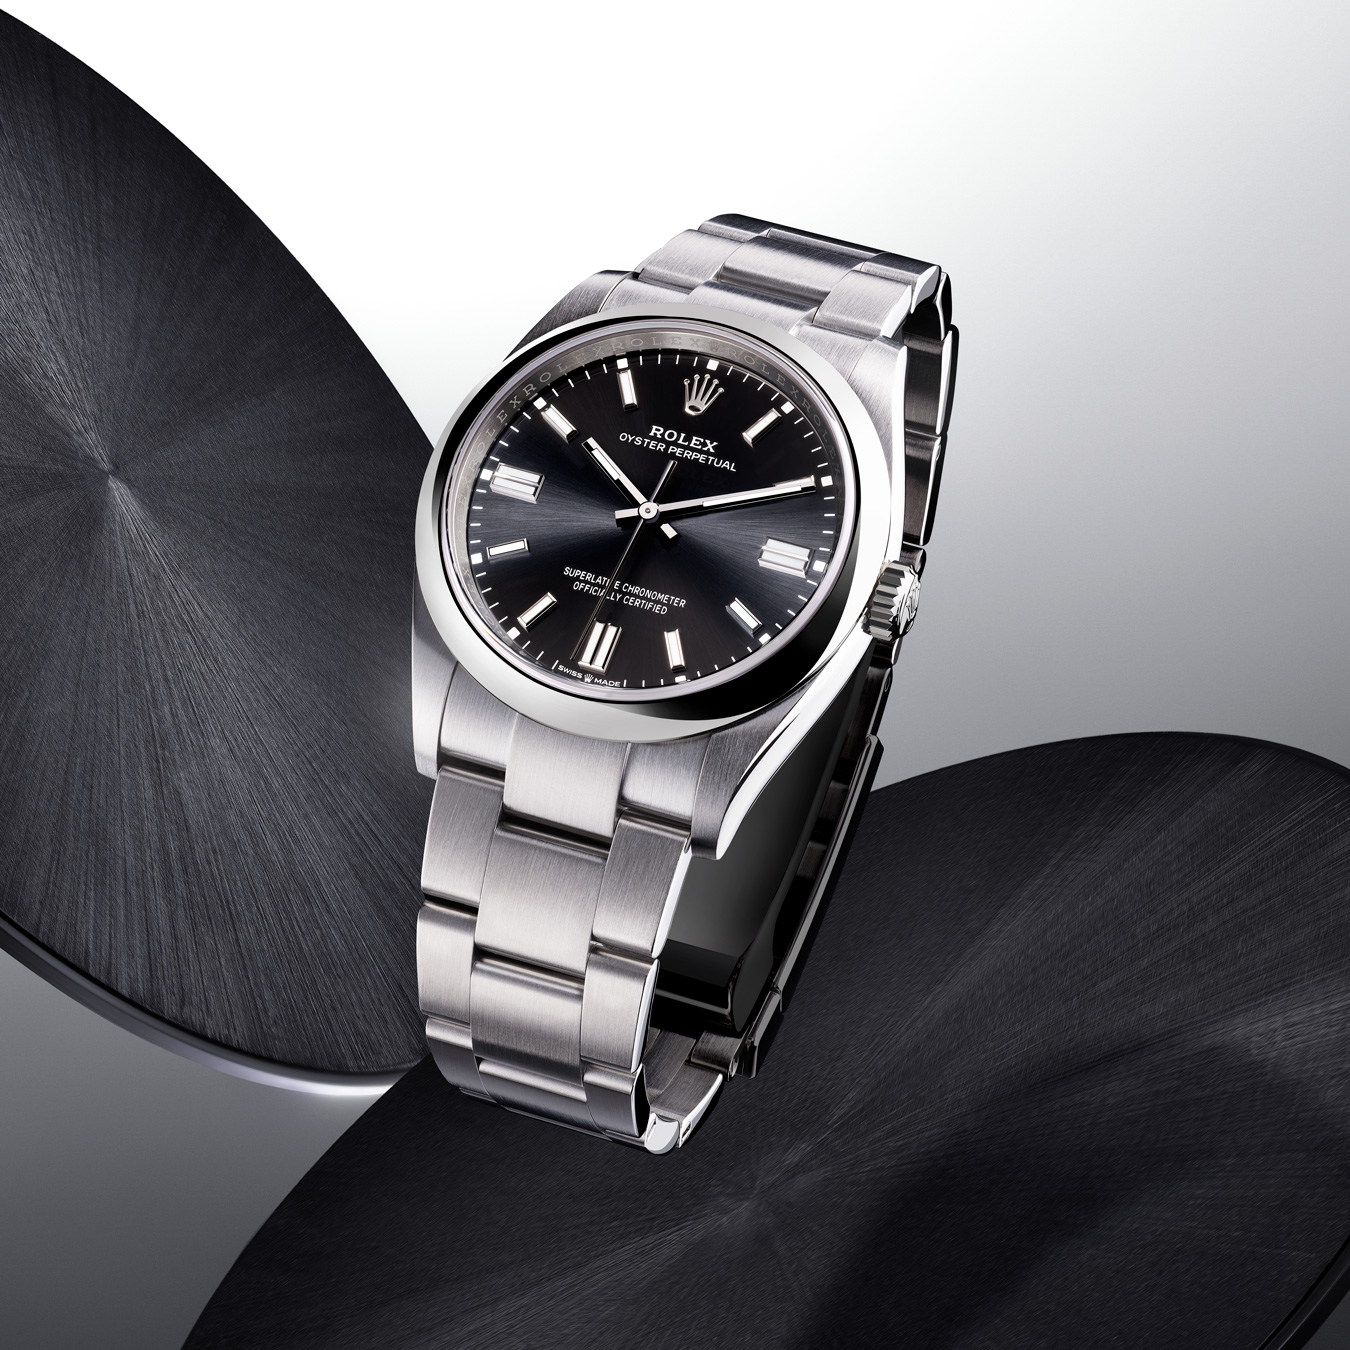 Rolex, The Essence of the Oyster | The Hour Glass